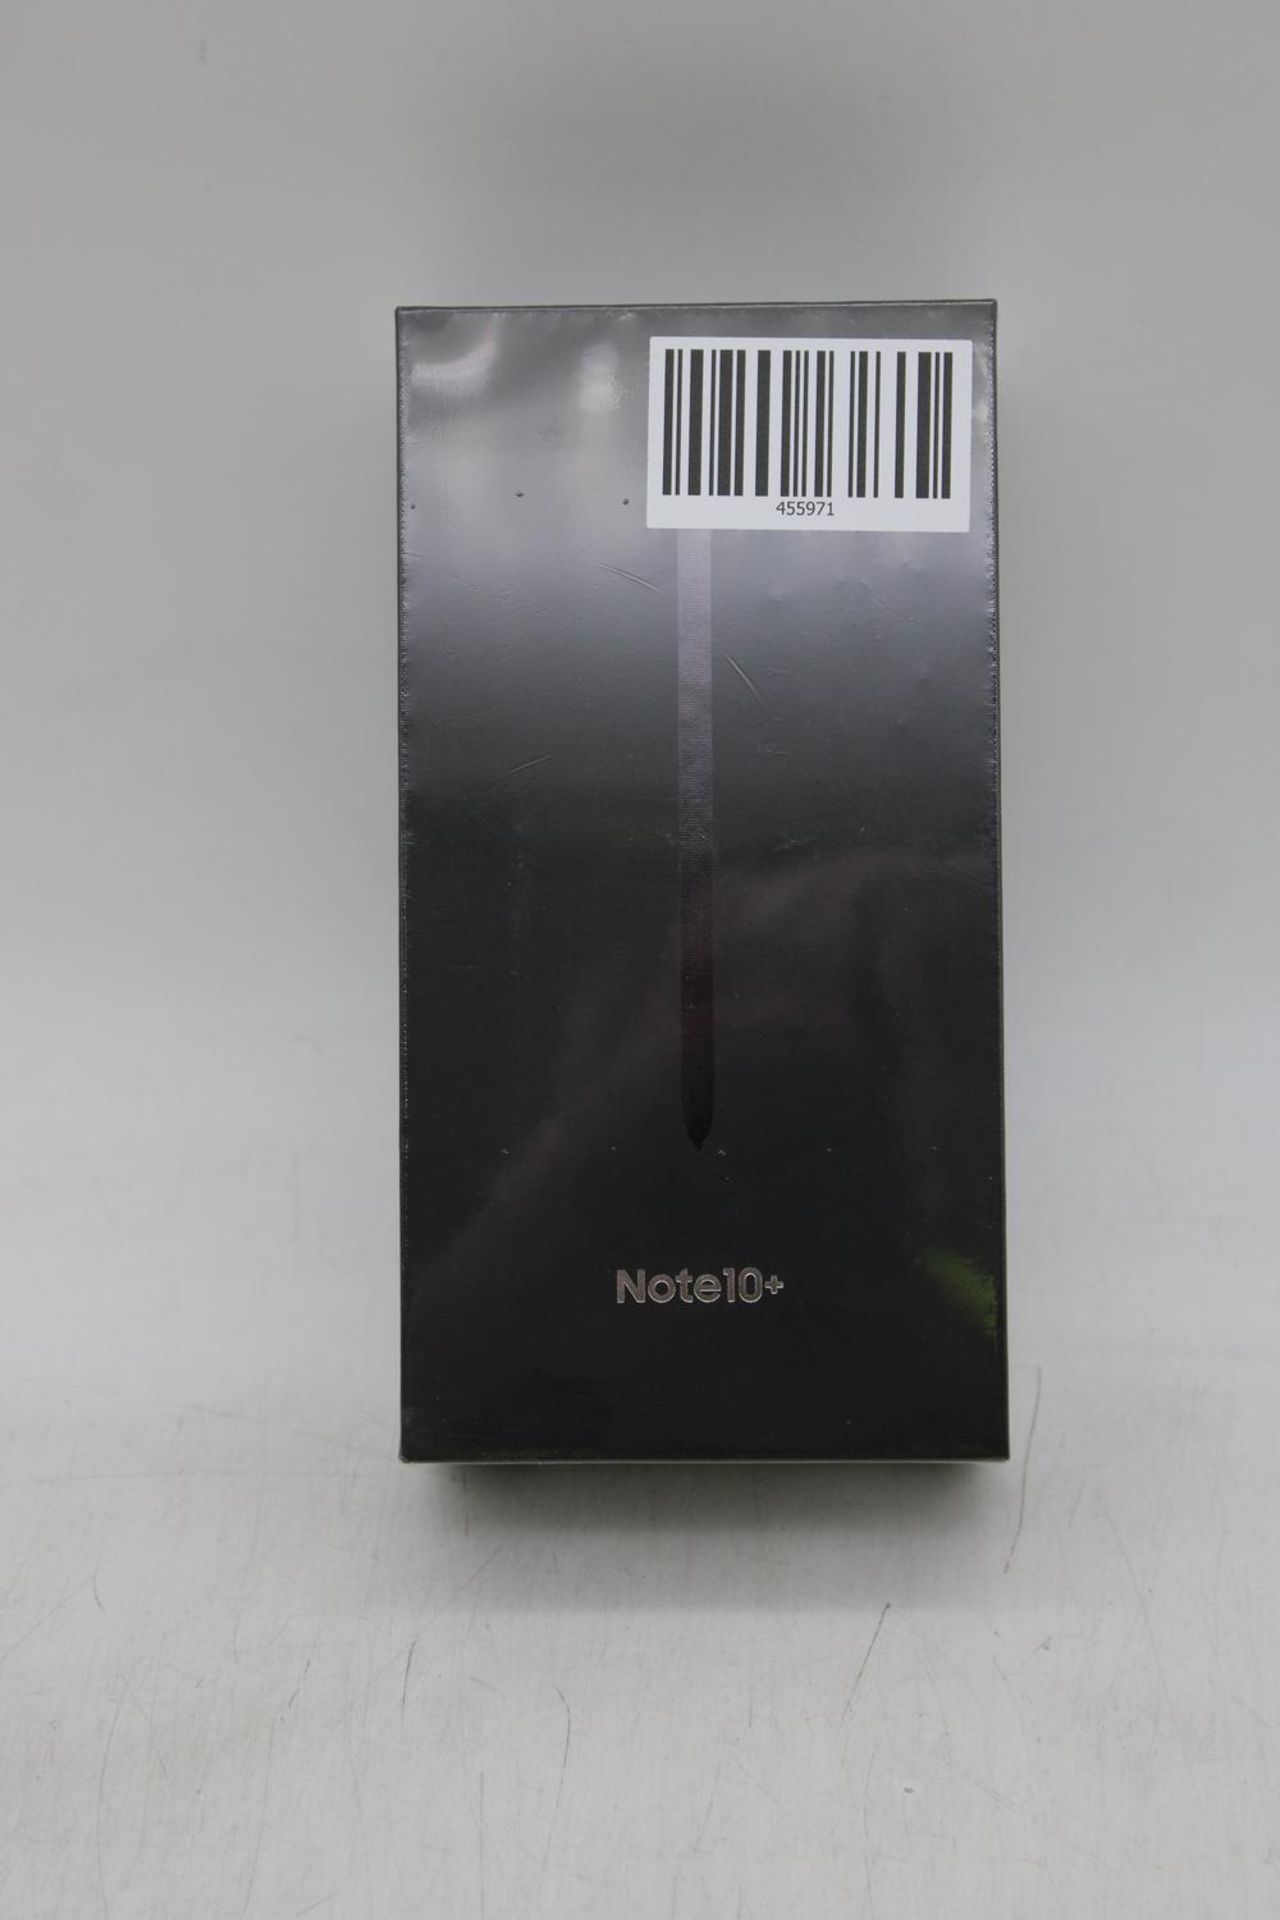 Samsung Galaxy Note10+ Android Mobile Phone, 265GB, Black. Brand new, box sealed. Checkmend clear, r - Image 2 of 2